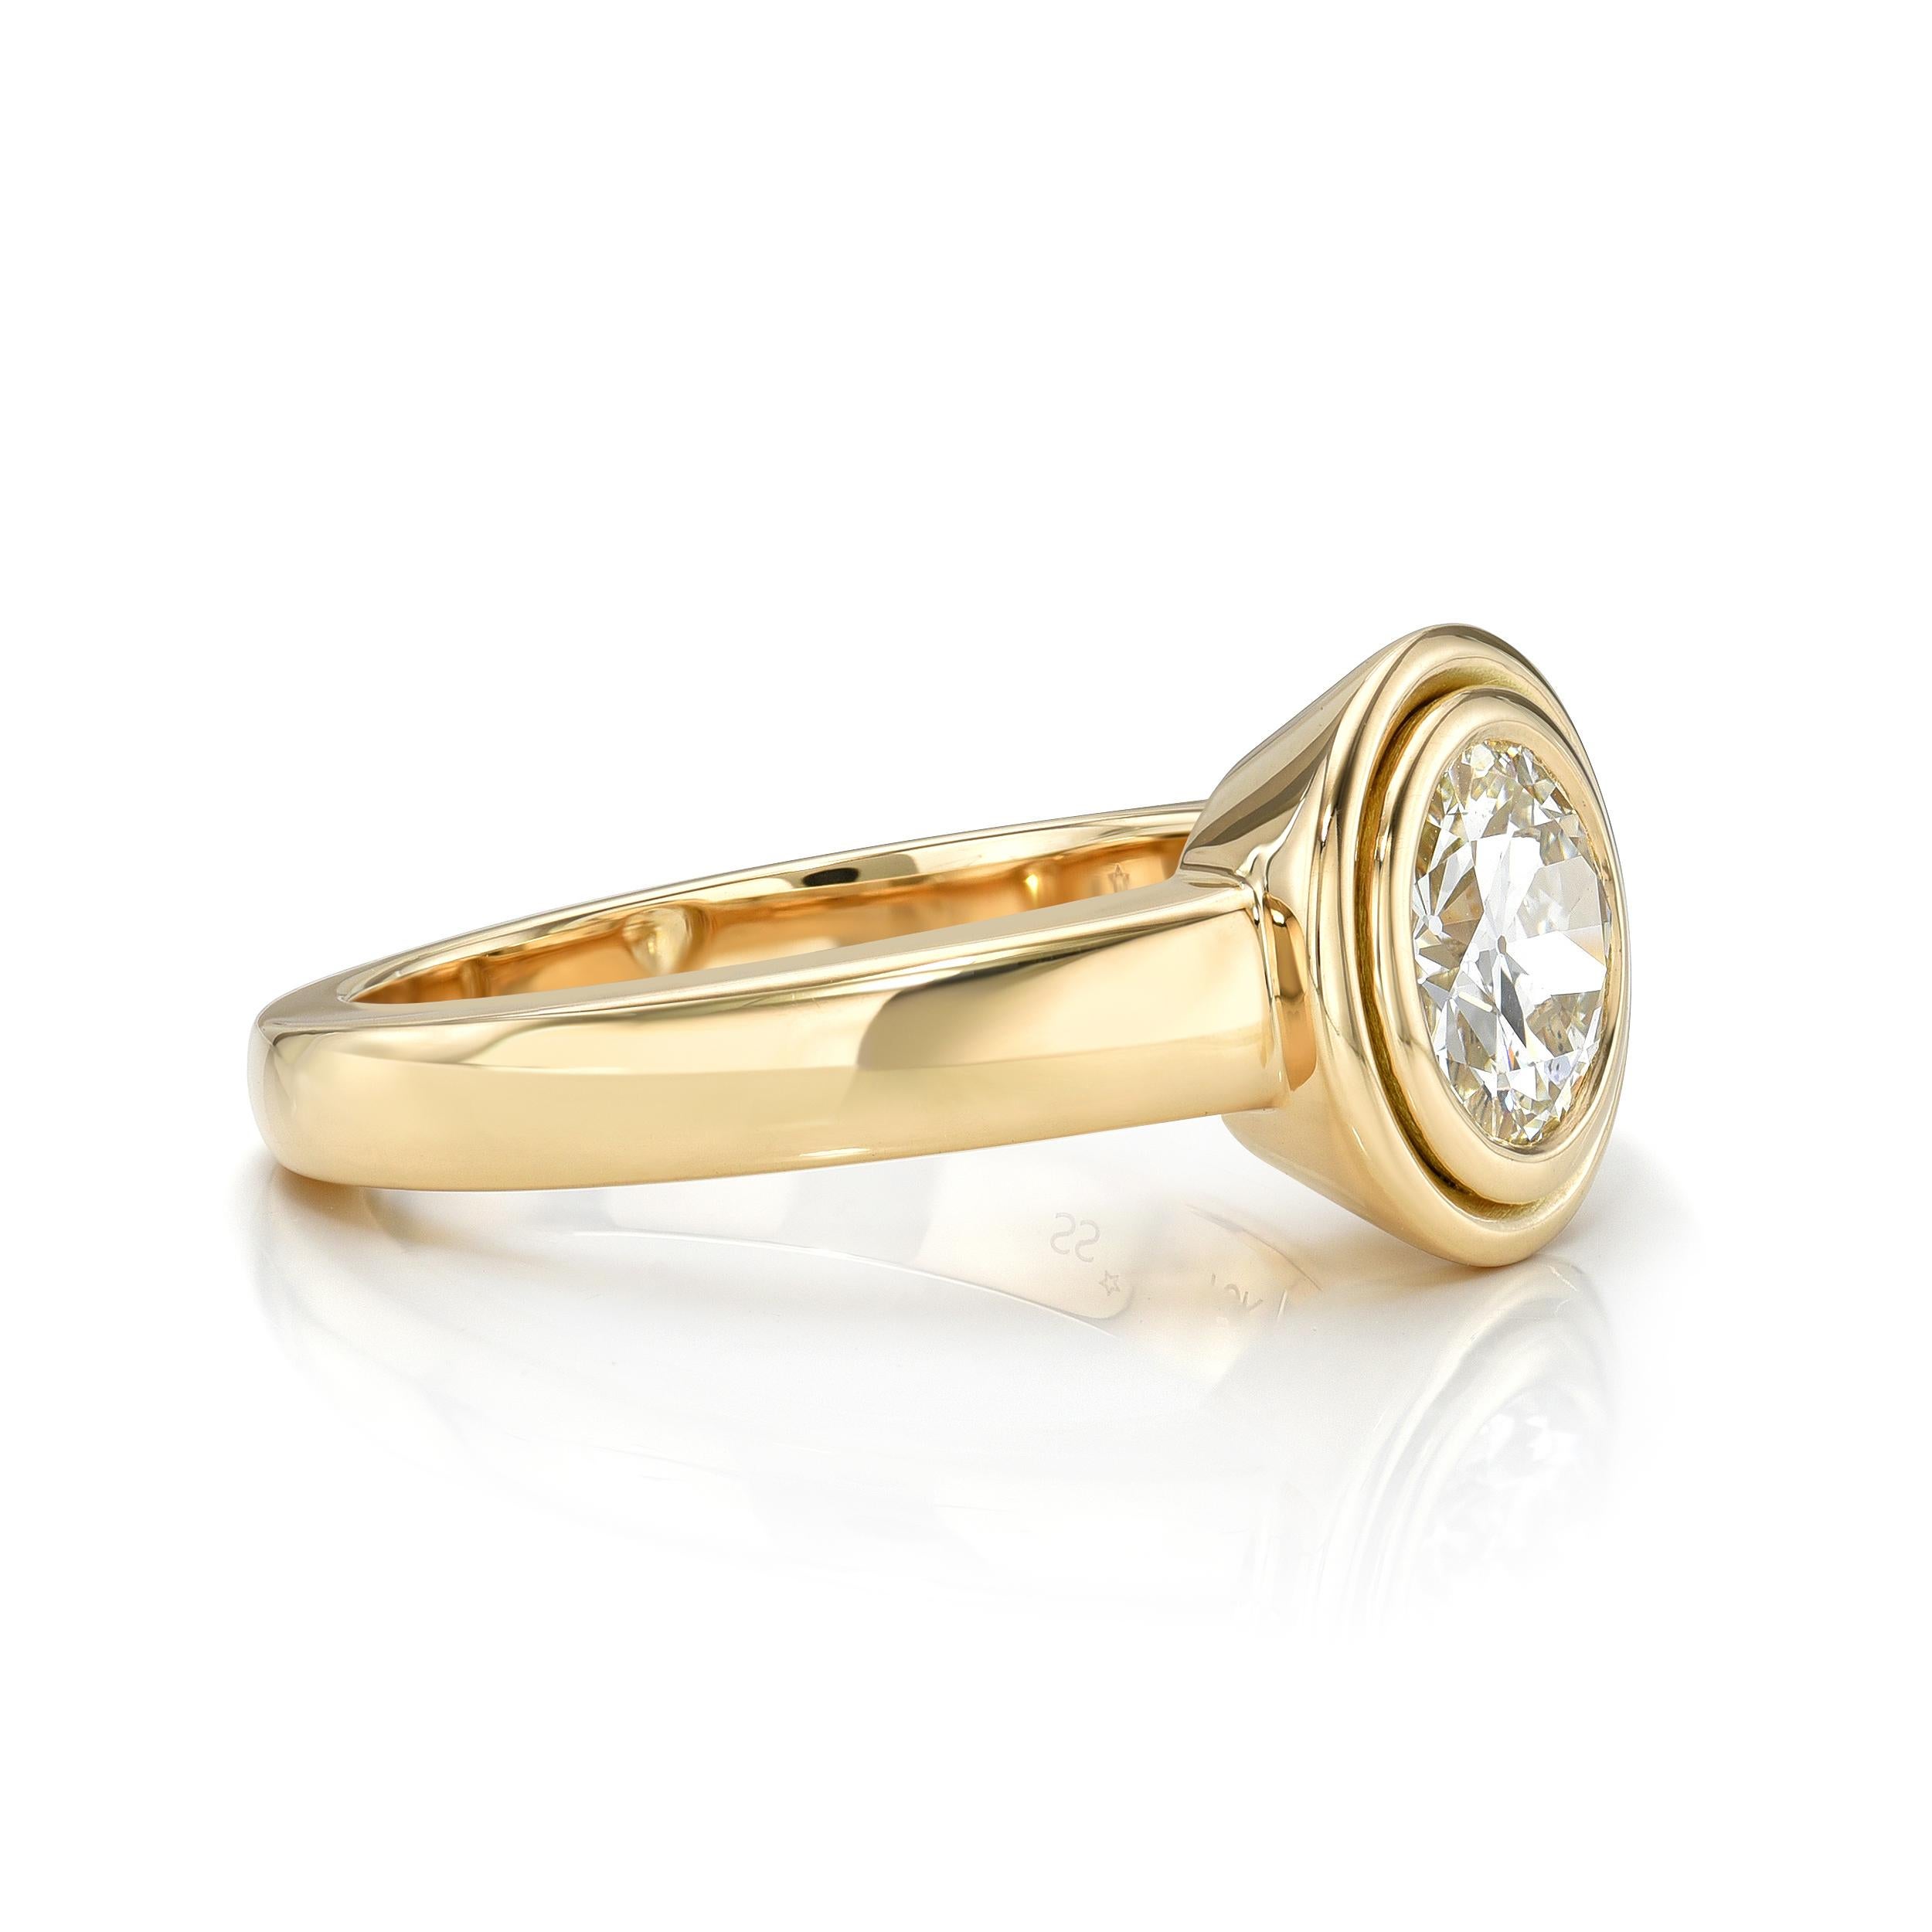 1.12ct K/SI1 GIA certified old European cut diamond bezel set in a handcrafted 18K yellow gold mounting.